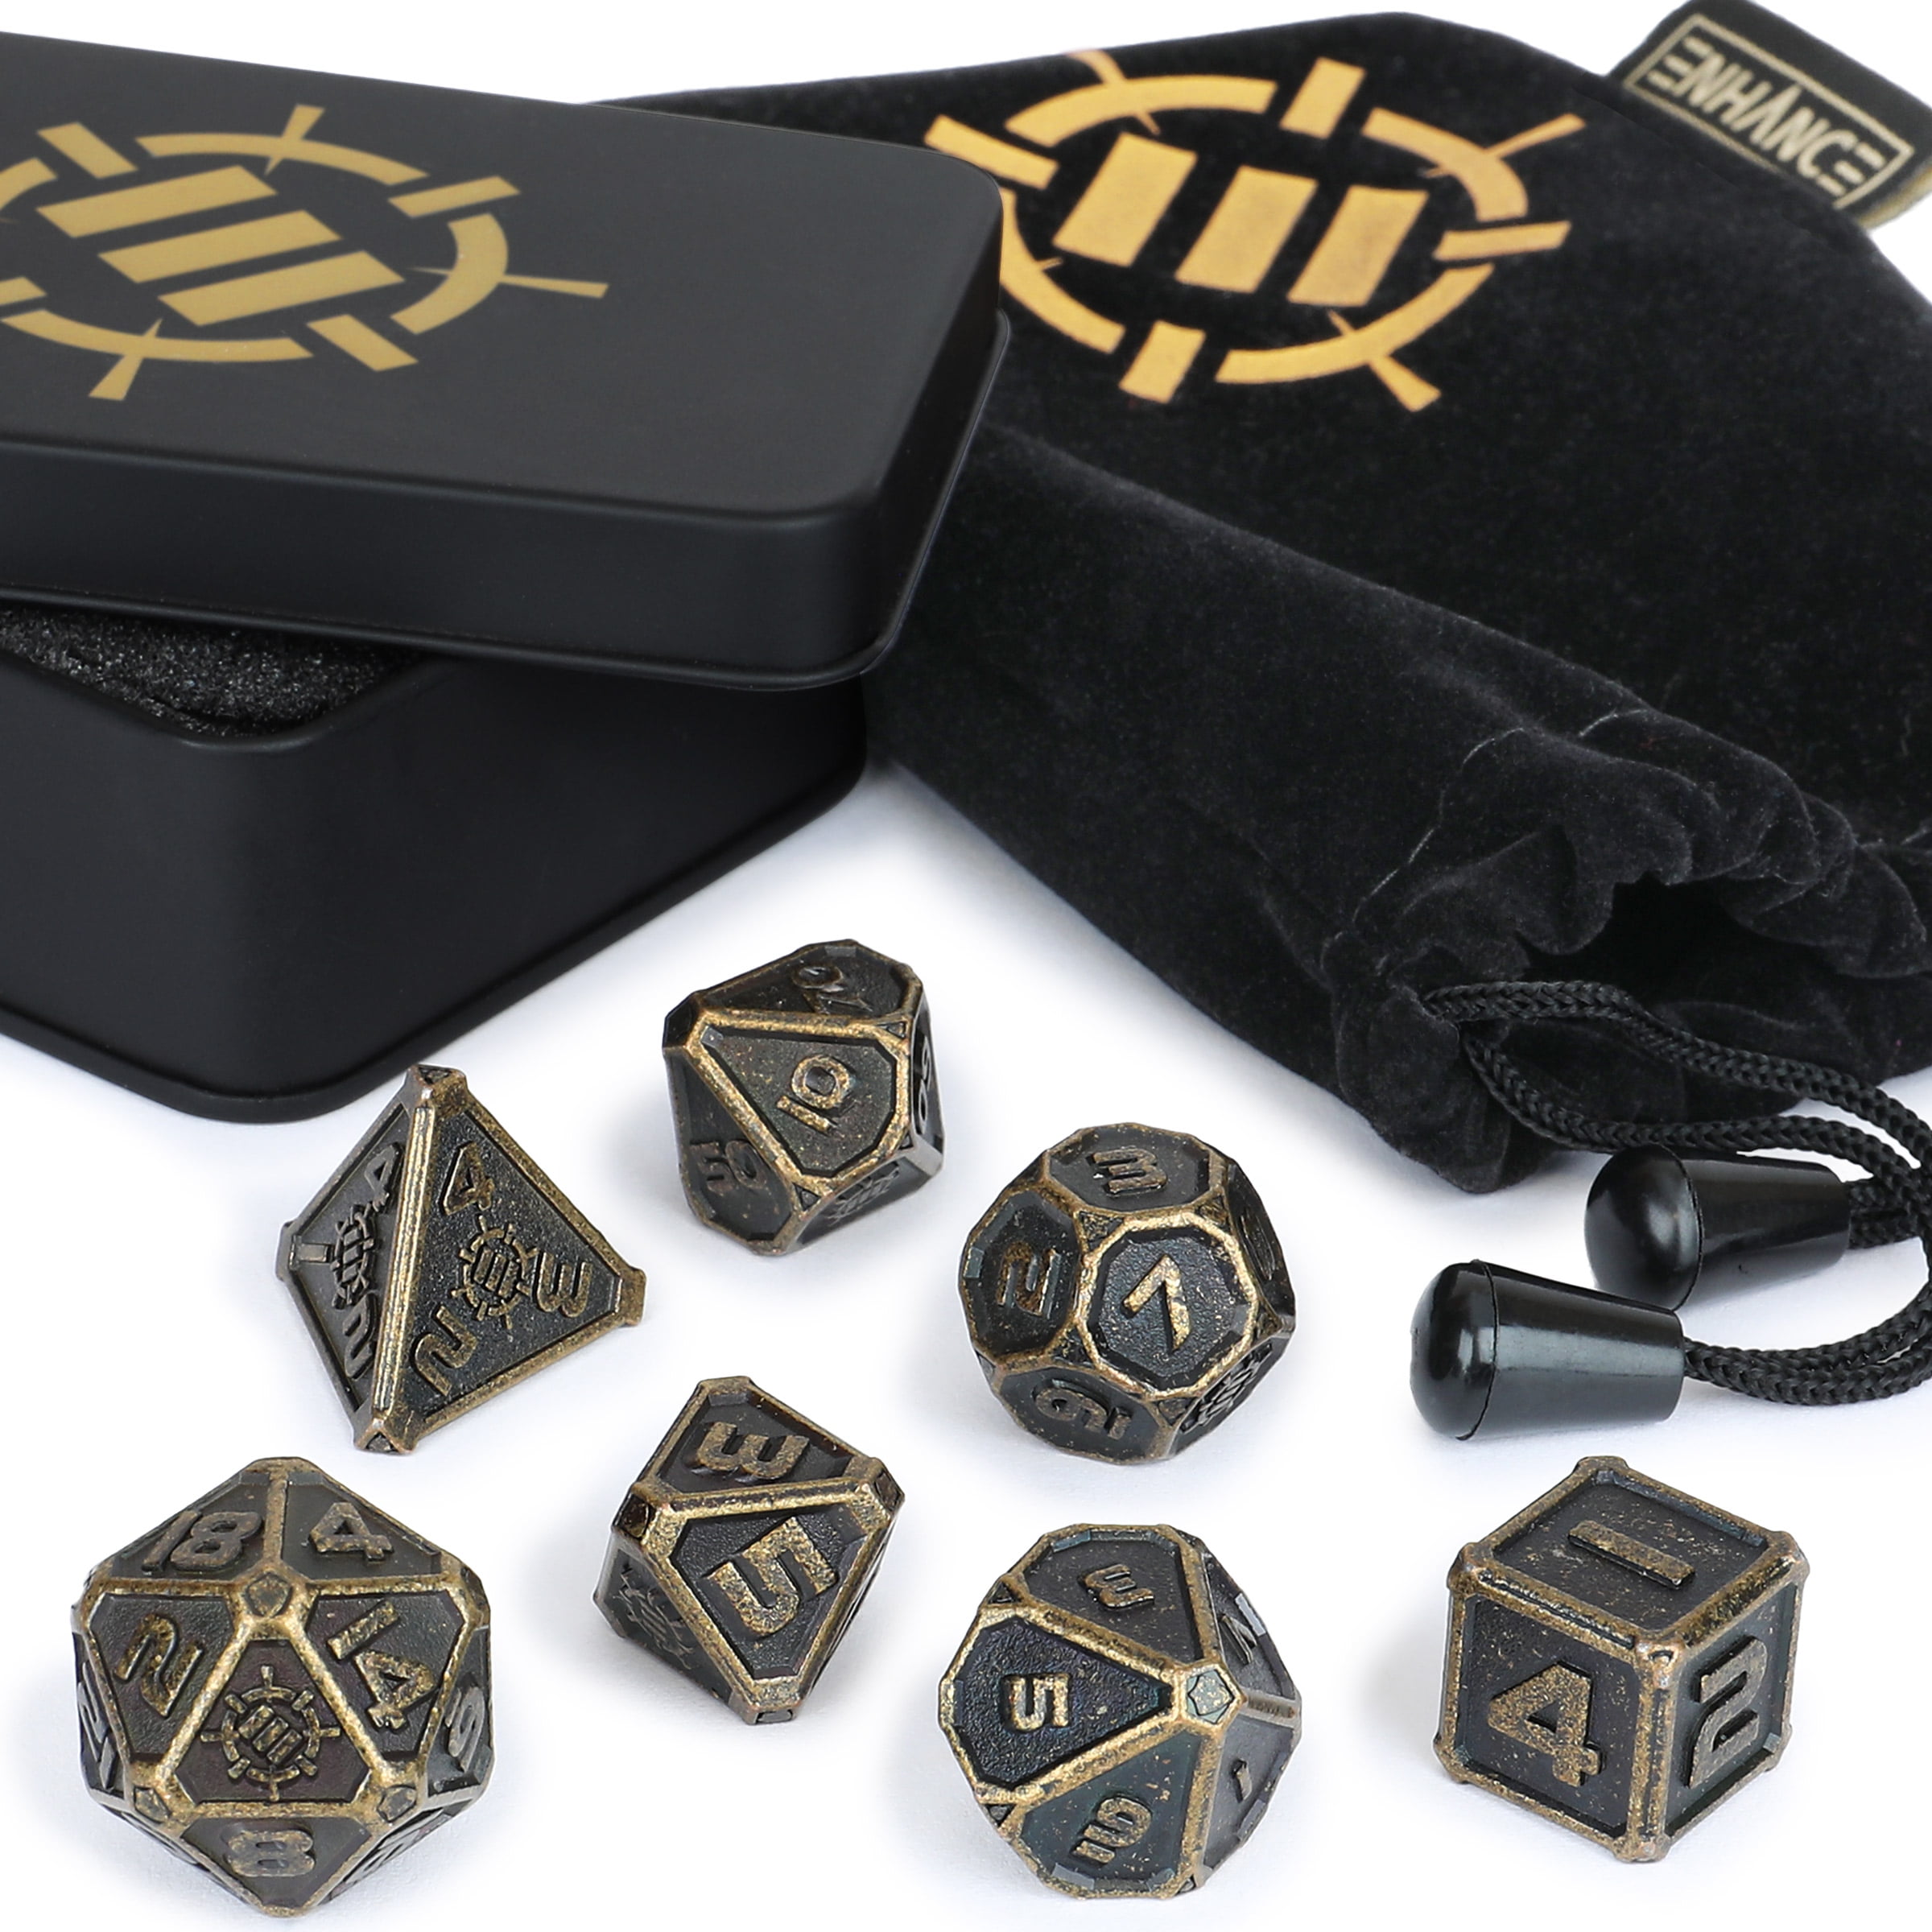 RPG Dice for Dungeons and Dragons Pathfinder 7pc Solid Zinc Alloy Polyhedral DND Dice with Metal Storage Case and Drawstring Dice Bag Included ENHANCE DND Metal Dice Set & More Ancient Bronze 